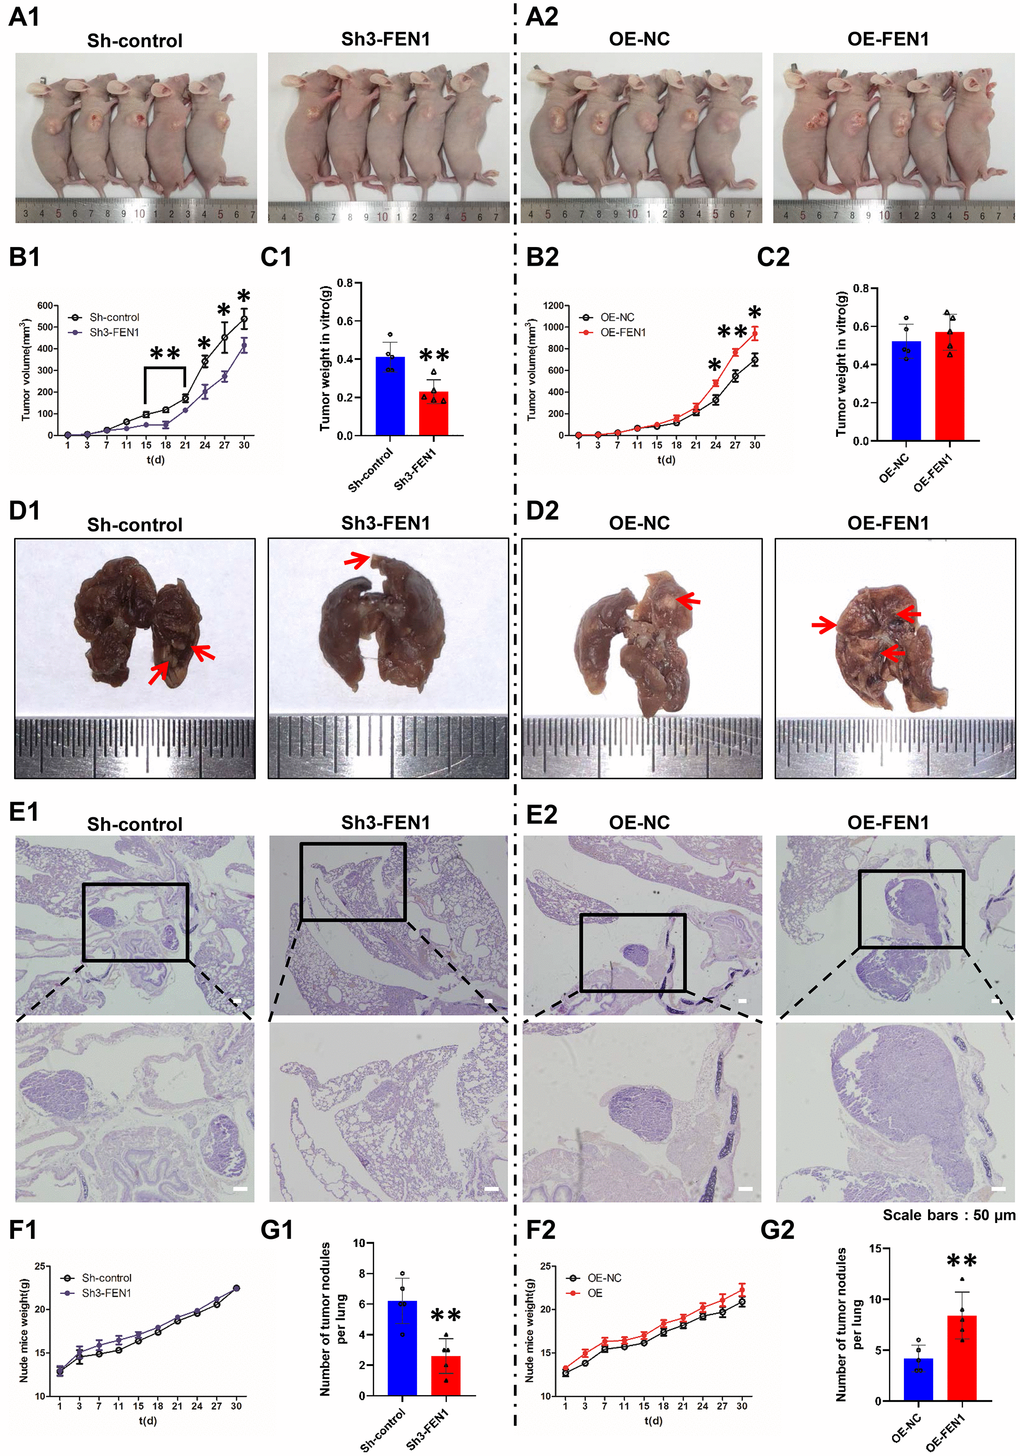 FEN1 promotes tumor growth and lung metastasis in vivo. (A) Images of nude mice bearing subcutaneous tumor xenografts derived either from Sh3-FEN1 (A1) or OE-FEN1 cells (A2). (B1 and B2) Xenograft tumor growth curves; n = 5 per group, *P PC1 and C2) Weights of tumors derived from euthanized nude mice at the endpoint; n = 5 per group, **P D1 and D2) Representative images of lungs with metastatic nodules shown on the surfaces (arrows indicate the nodules) 30 days after injection of cells stably silencing or overexpressing FEN1. (E1 and E2) Representative H & E stained lung tissue sections showing metastatic nodules (arrows); original magnification, 100 x for the upper panels and 200 x for the lower panels. (F1 and F2) Weight growth curves of nude mice, n = 5 per group. (G1 and G2) Number of metastatic nodules on the lung surfaces; data represent mean ± SD, n = 5 per group, **P 